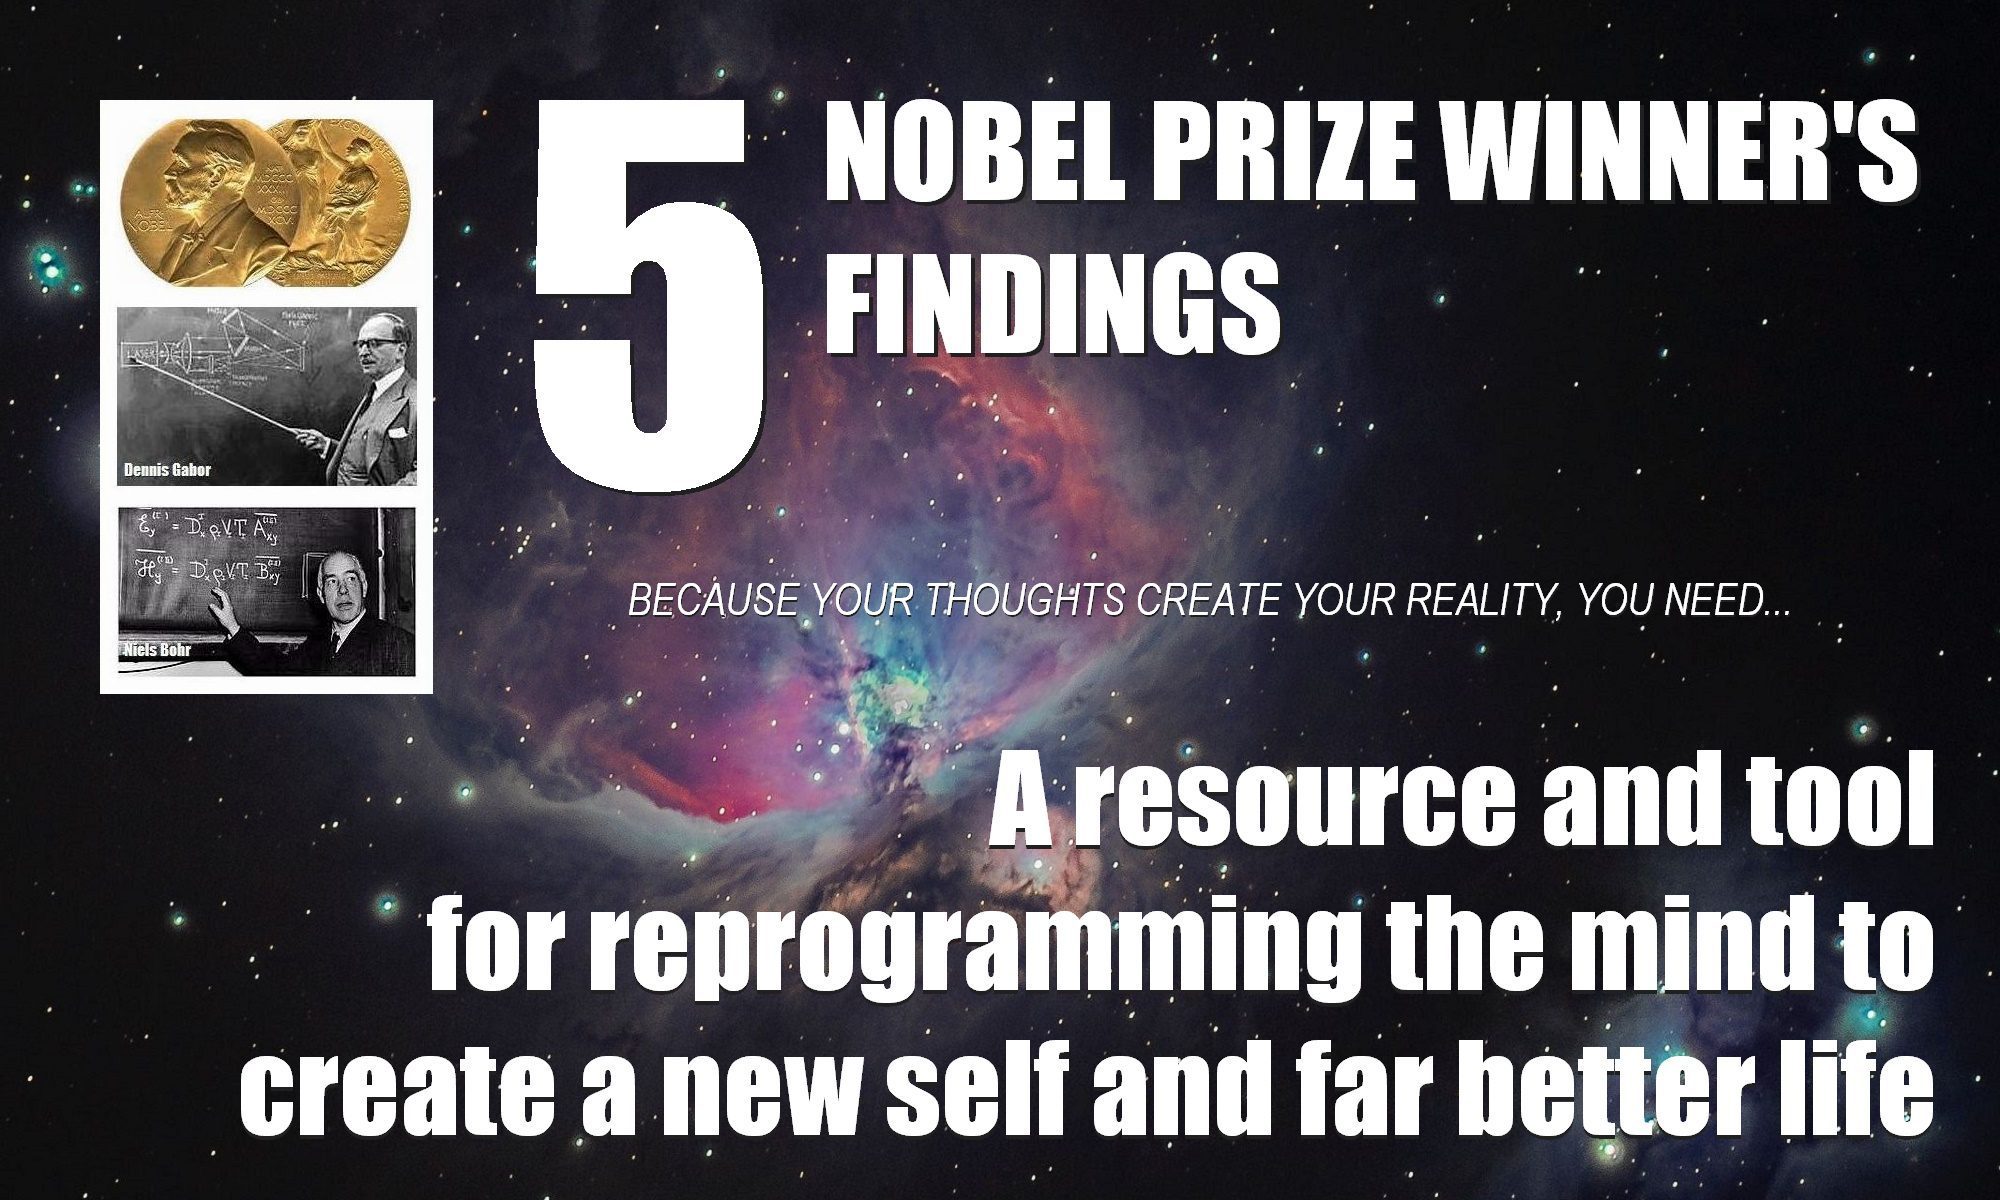 resource-tool-for-reprogramming-mind-subconscious-how-to-create-a-new-self-better-life